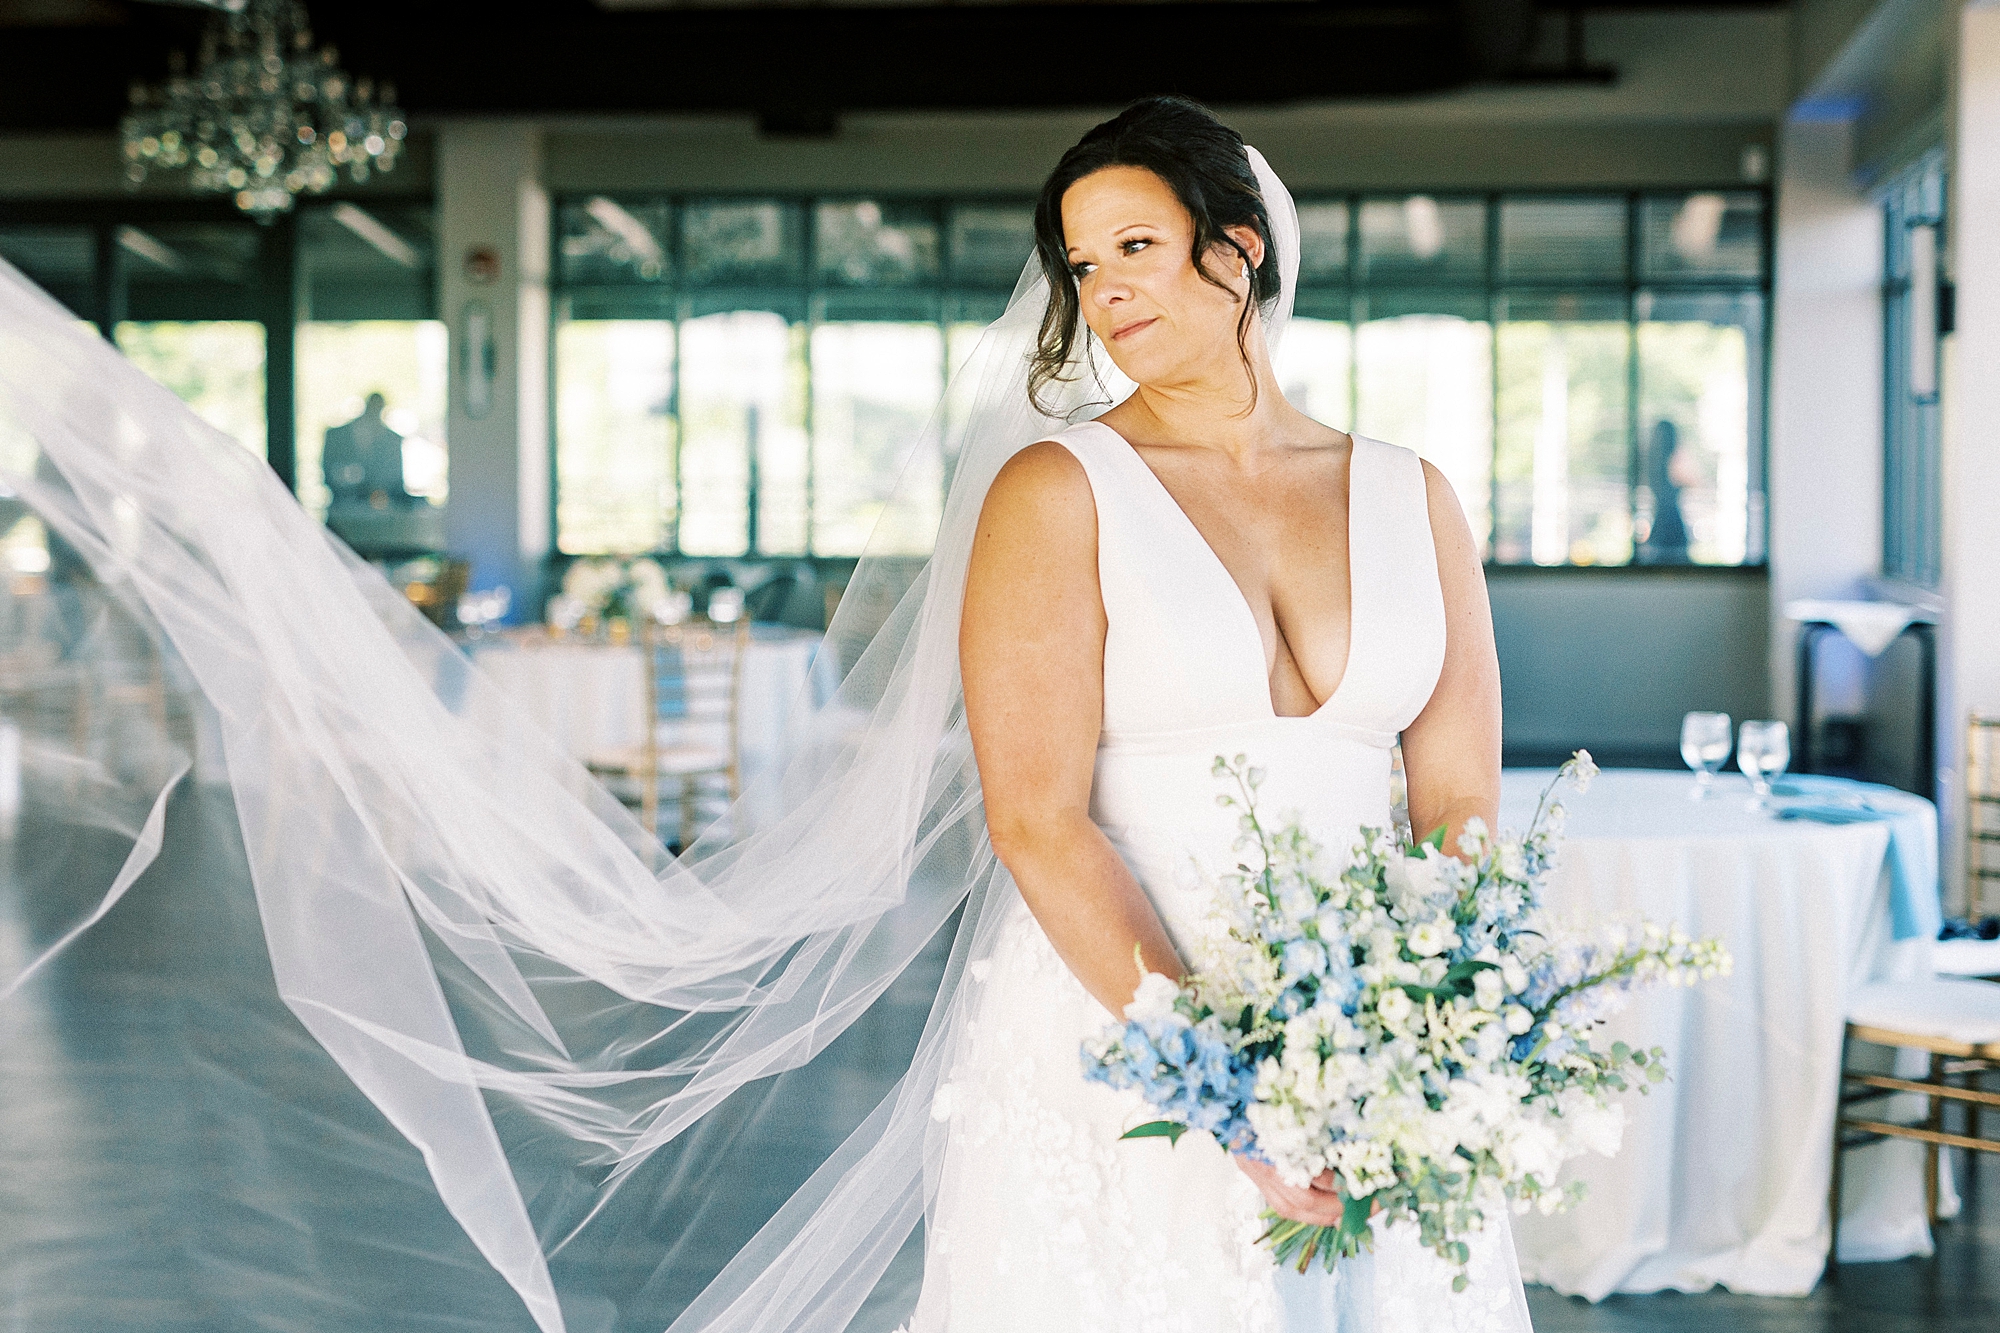 bride stands holding bouquet of blue and white flowers with veil floating